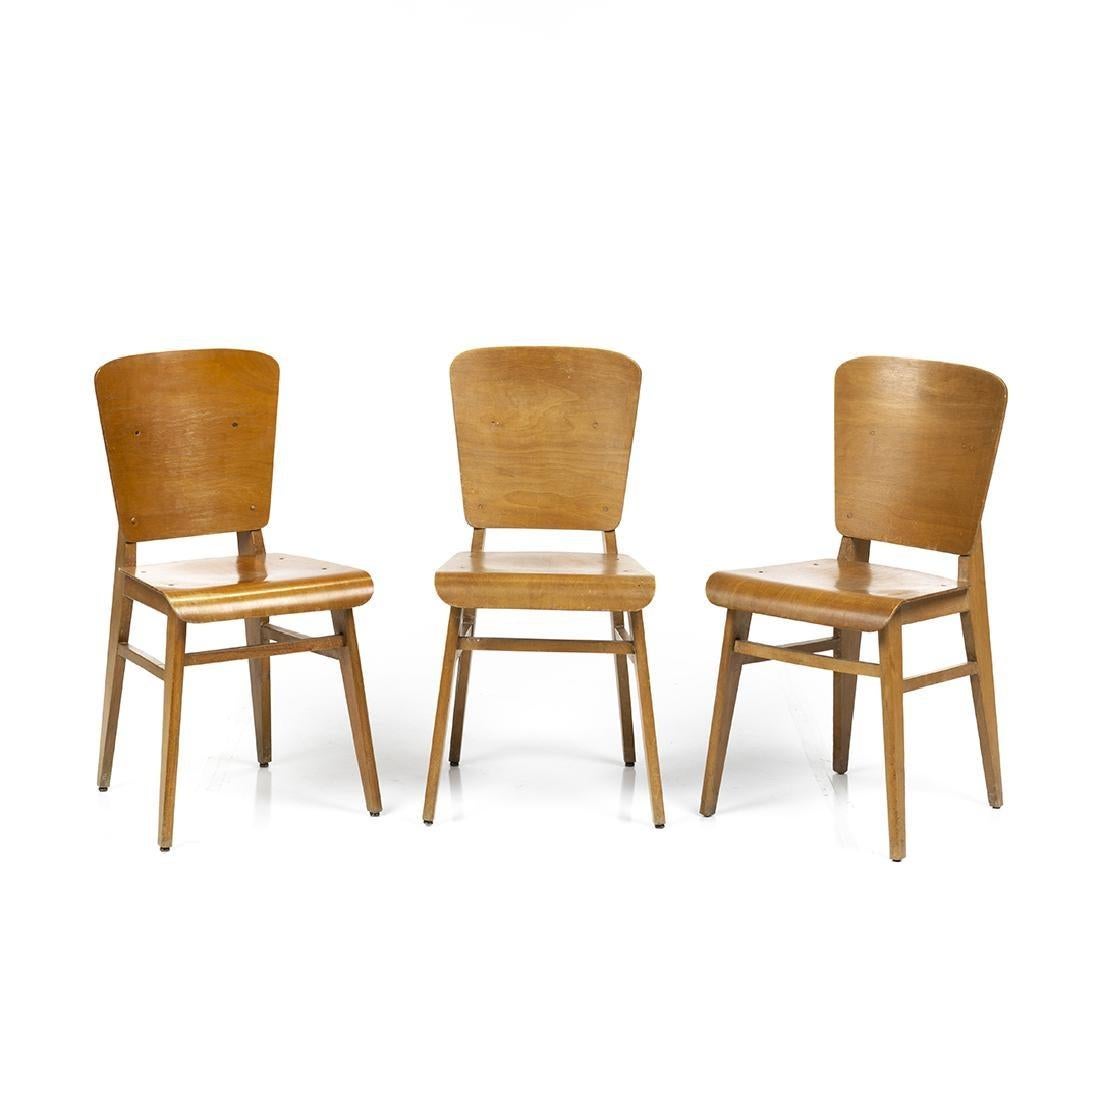 Set of six molded birch plywood dining chairs in the style of Jean Prouvé, France, circa 1950s.